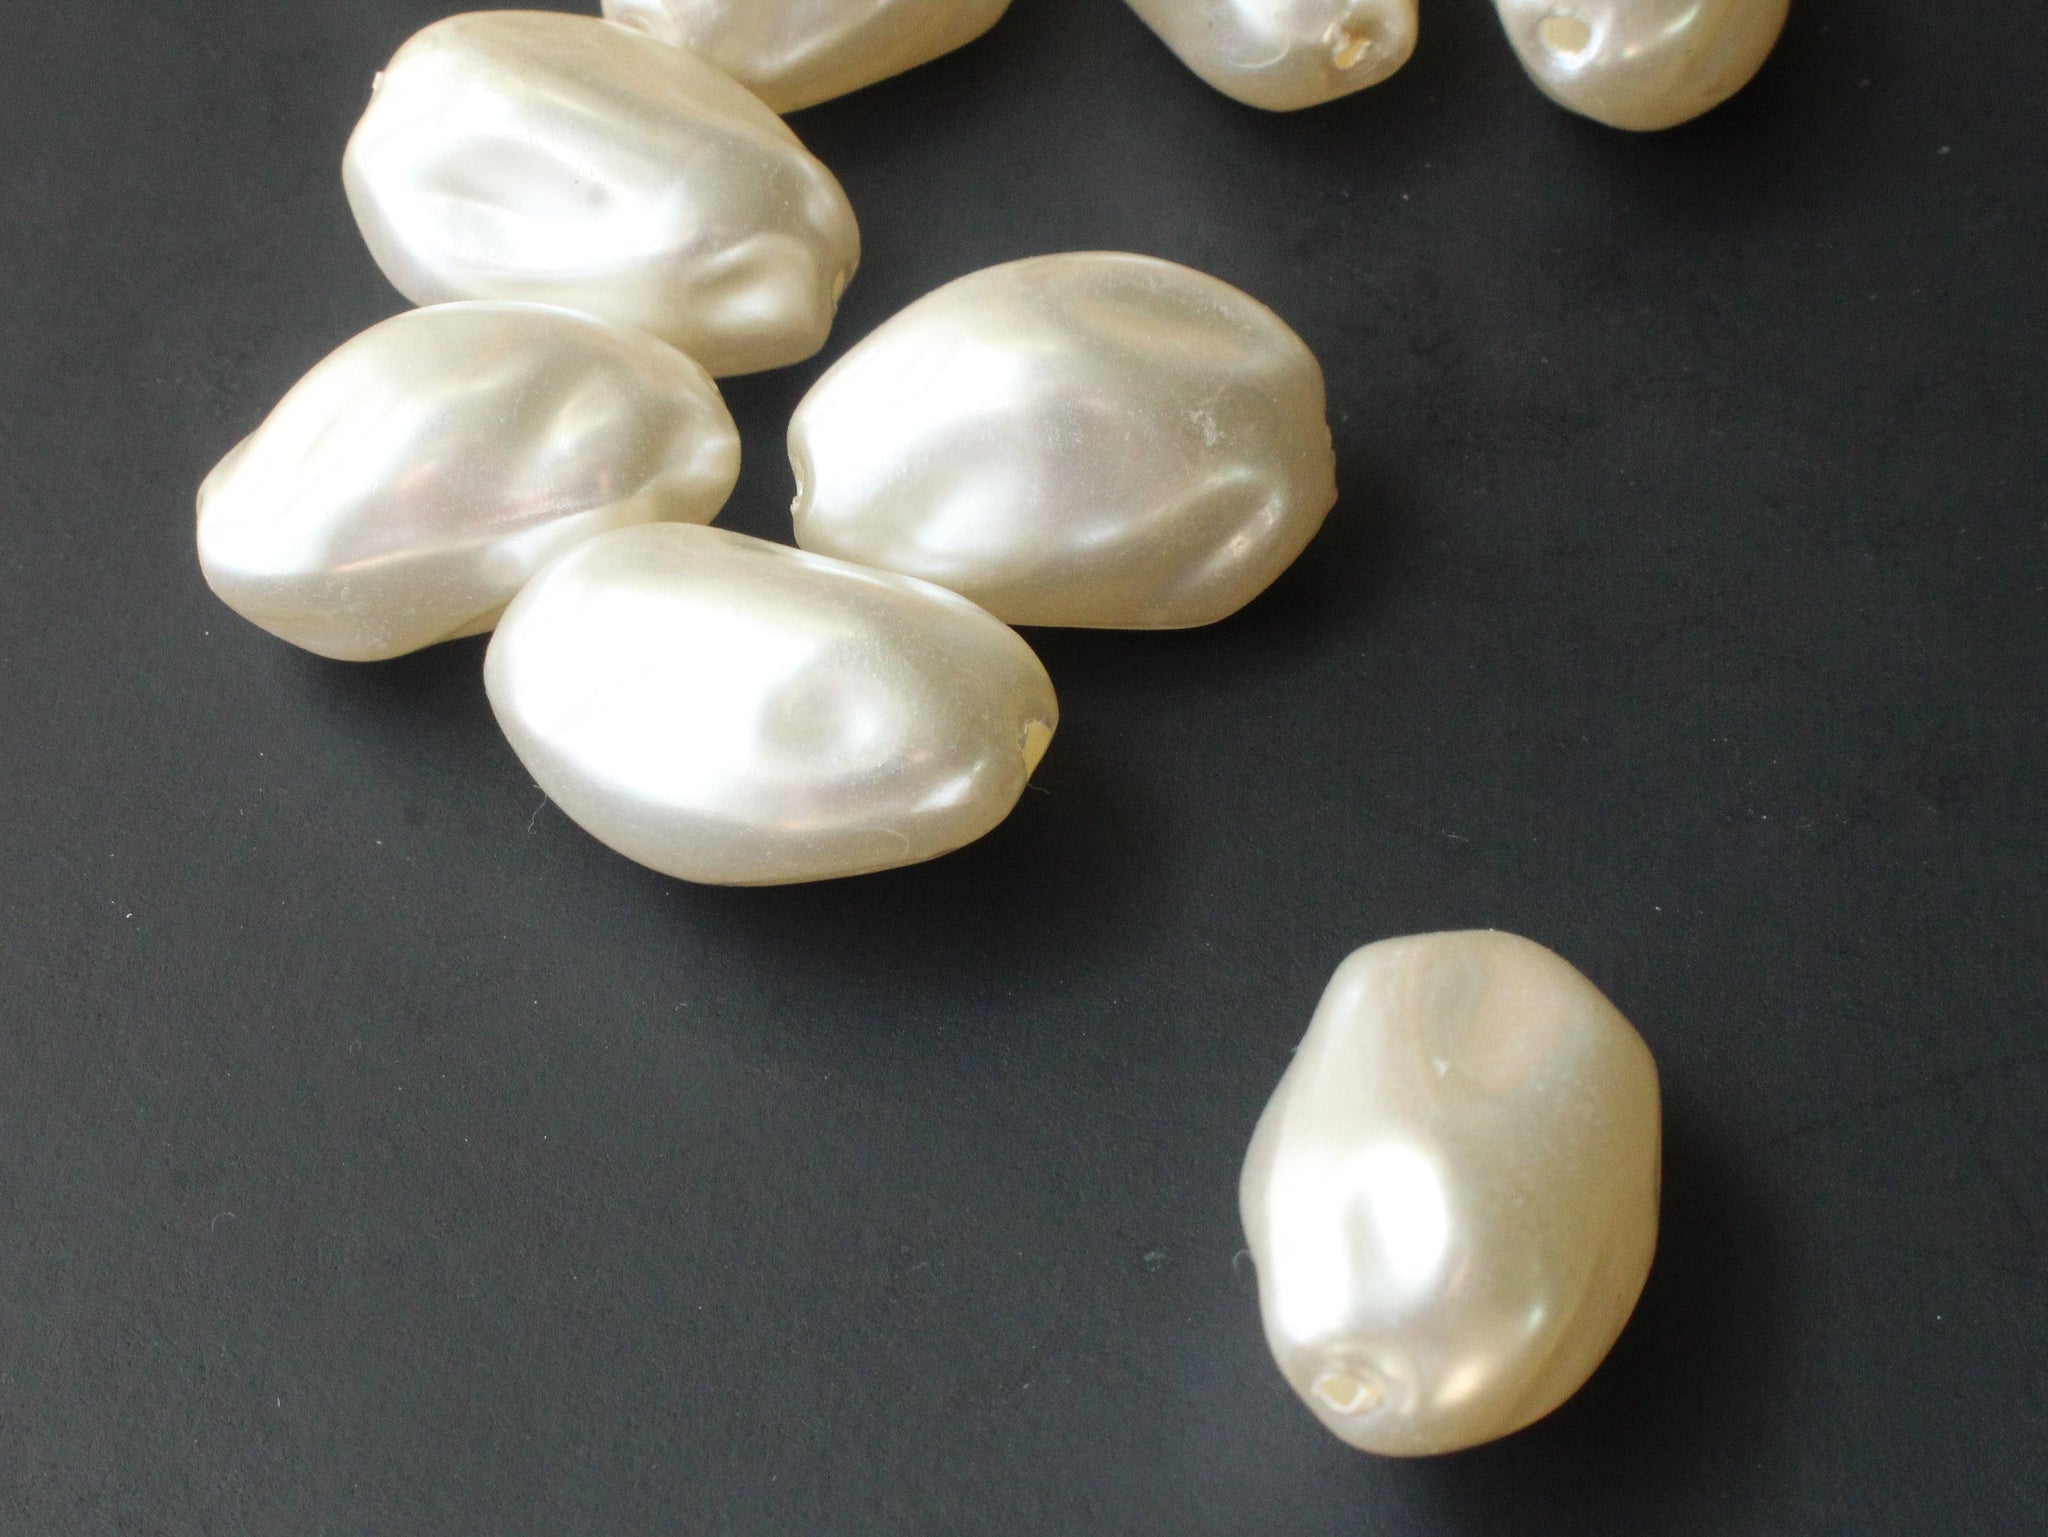 14-16mm Large Baroque Pearls, Natural White Pearls, Near Round Shape Pearl  Beads ,for Jewelry, Pearls, Single Piece PB1088